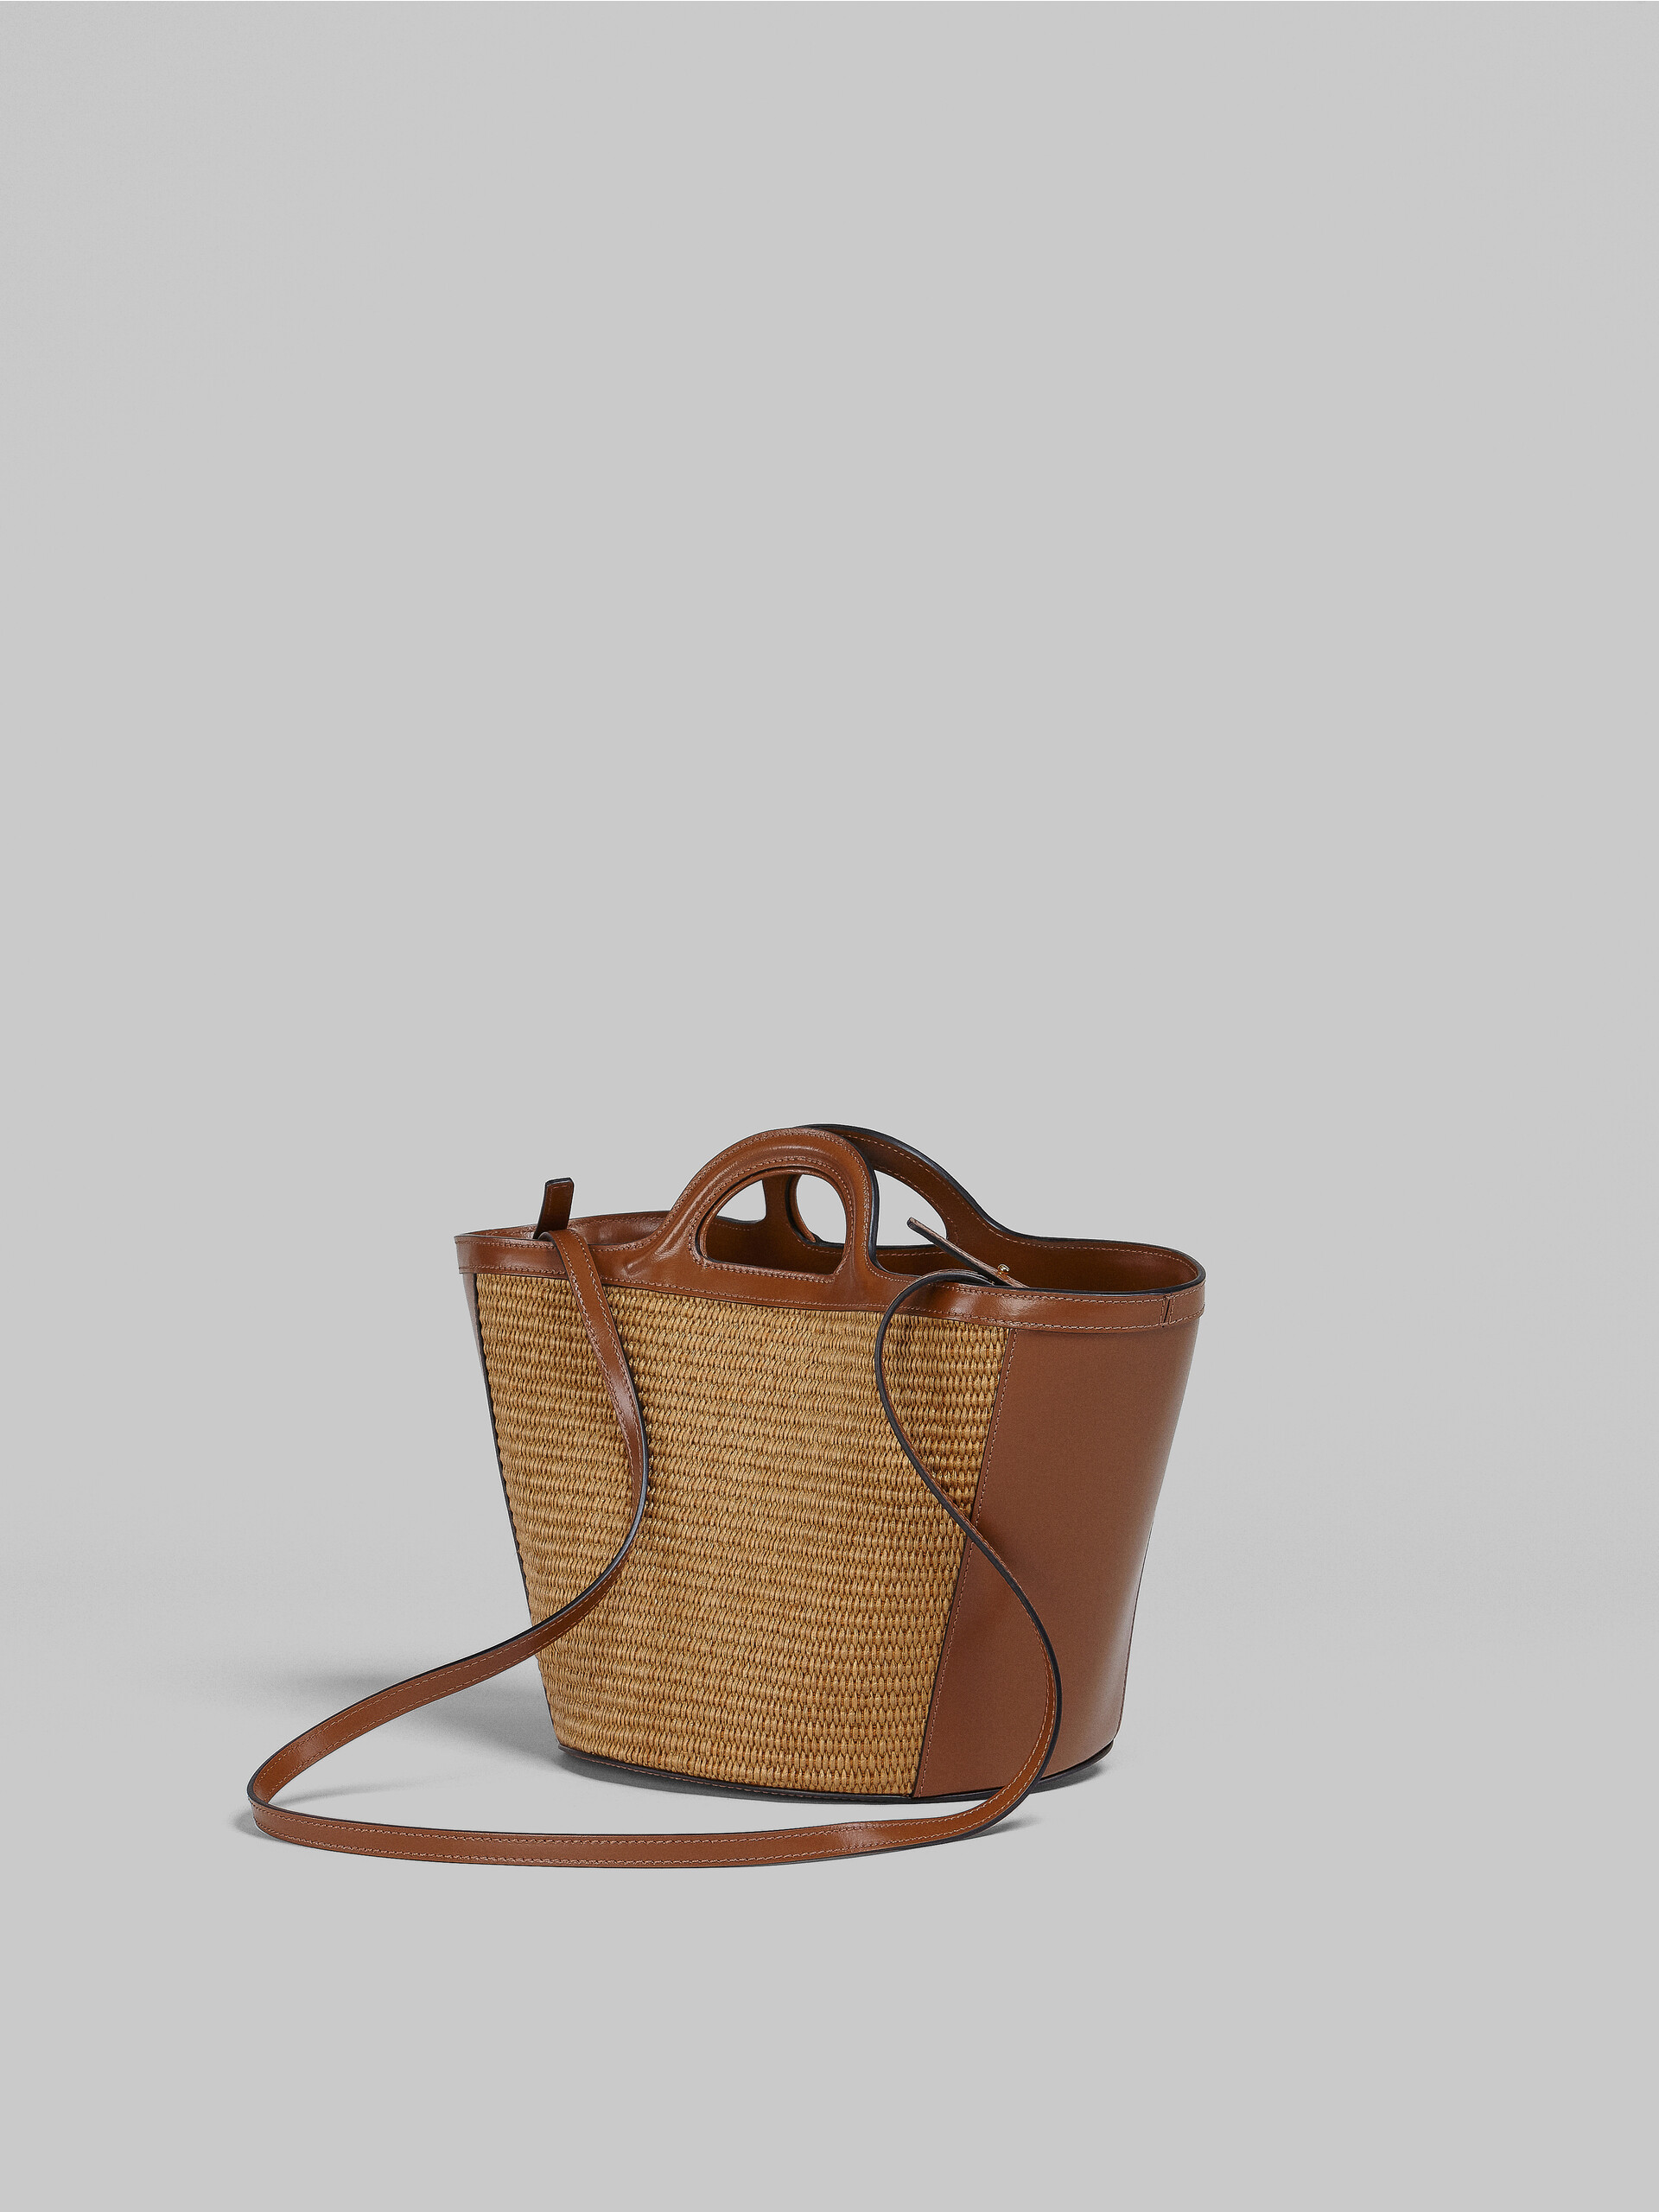 Tropicalia Small Bag in brown leather and raffia